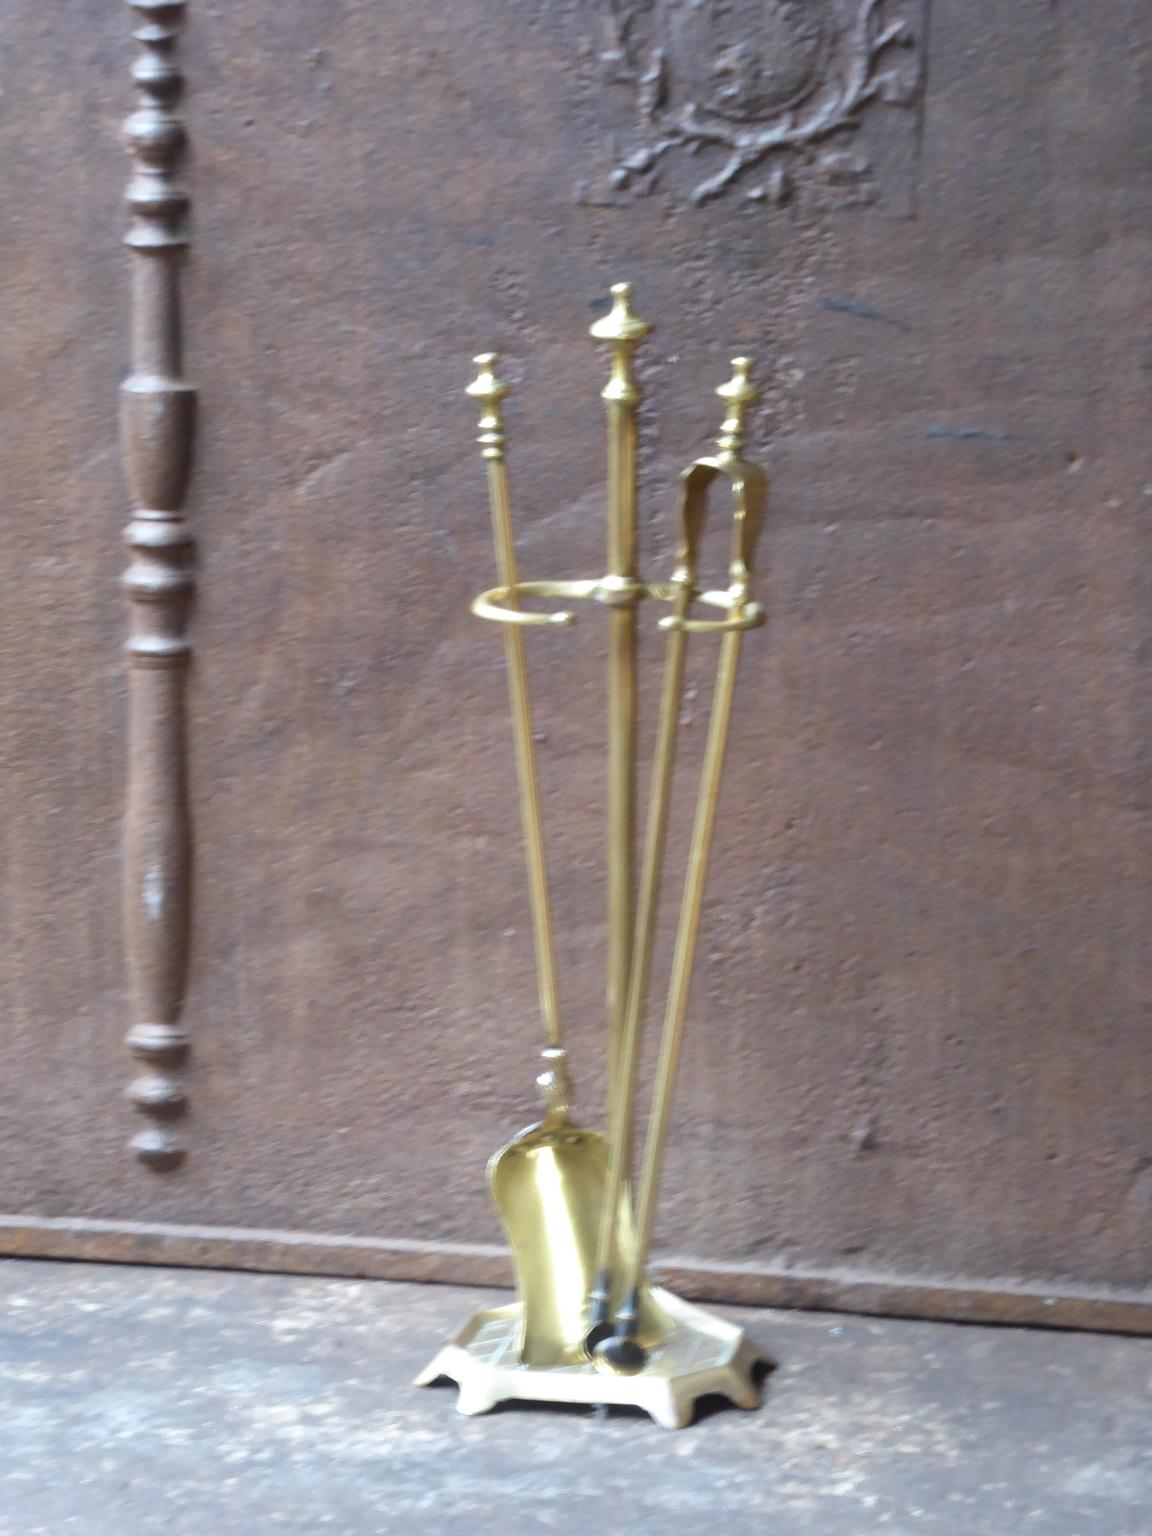 19th-early 20th century French Napoleon III fireplace tool set, fire irons made of polished brass. The toolset consists of a stand and two fire irons. It is in a good condition and is fully functional.







 